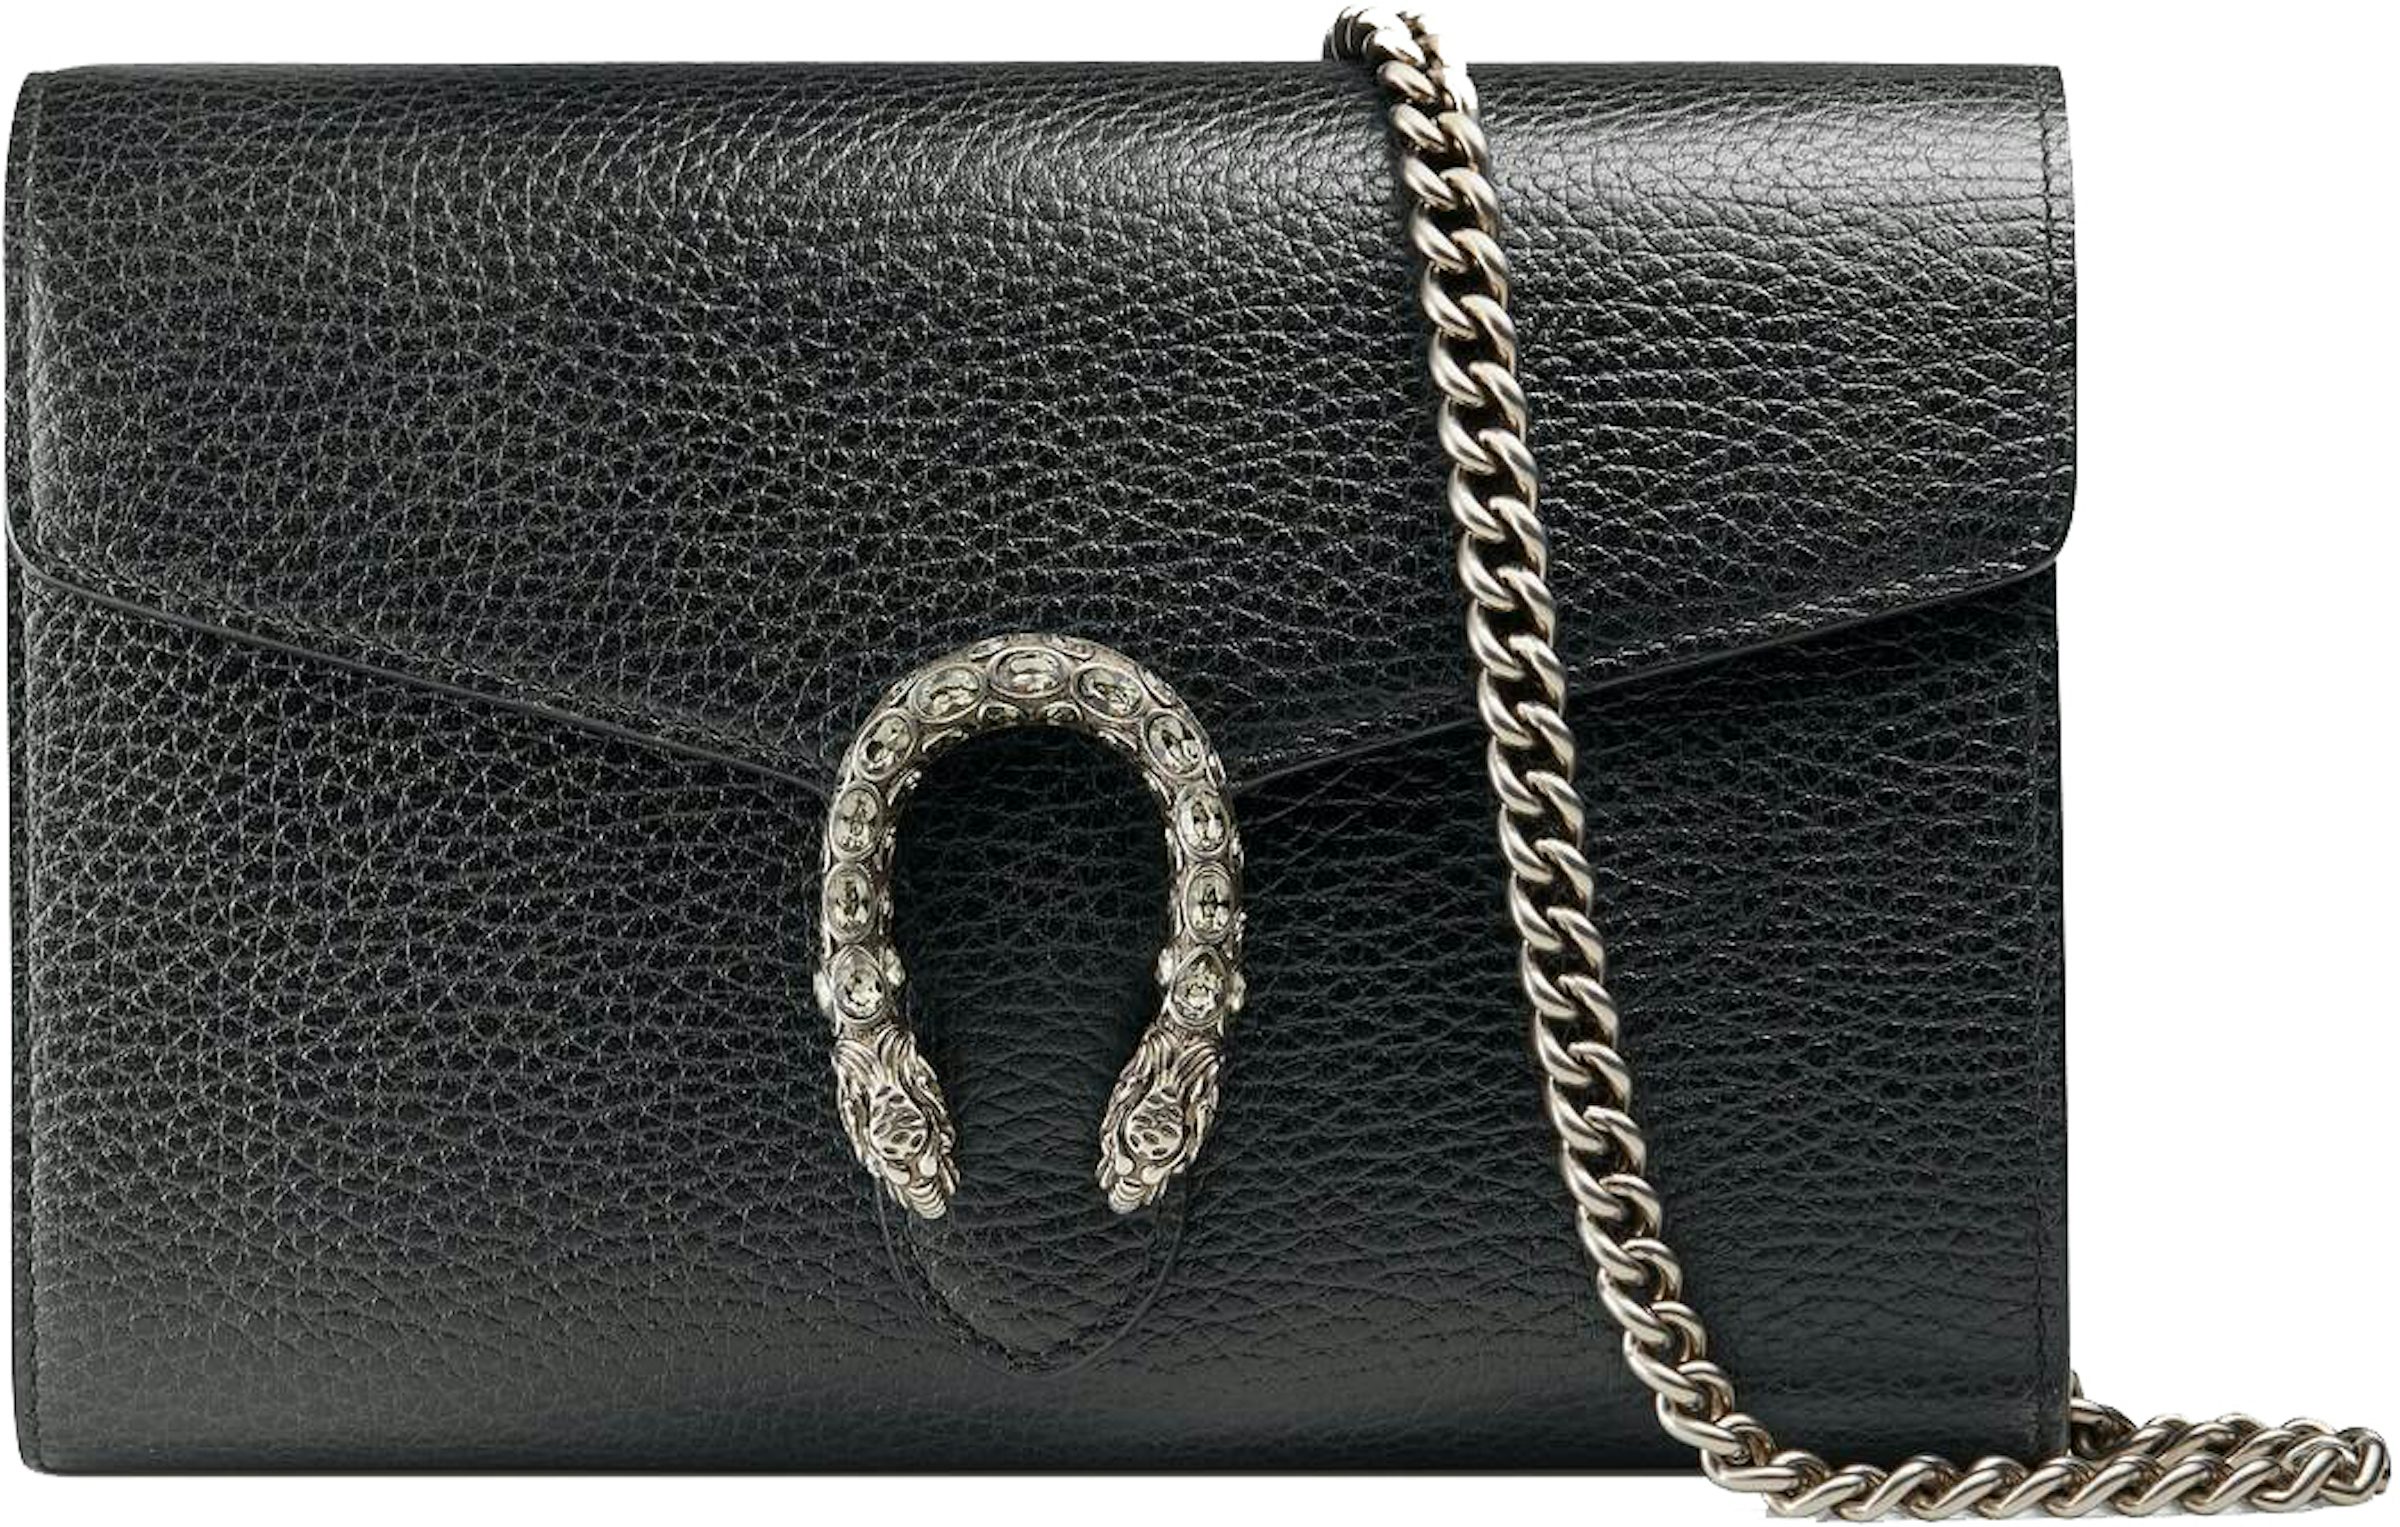 Wallet On Chain With Pouches - Black leather minibag